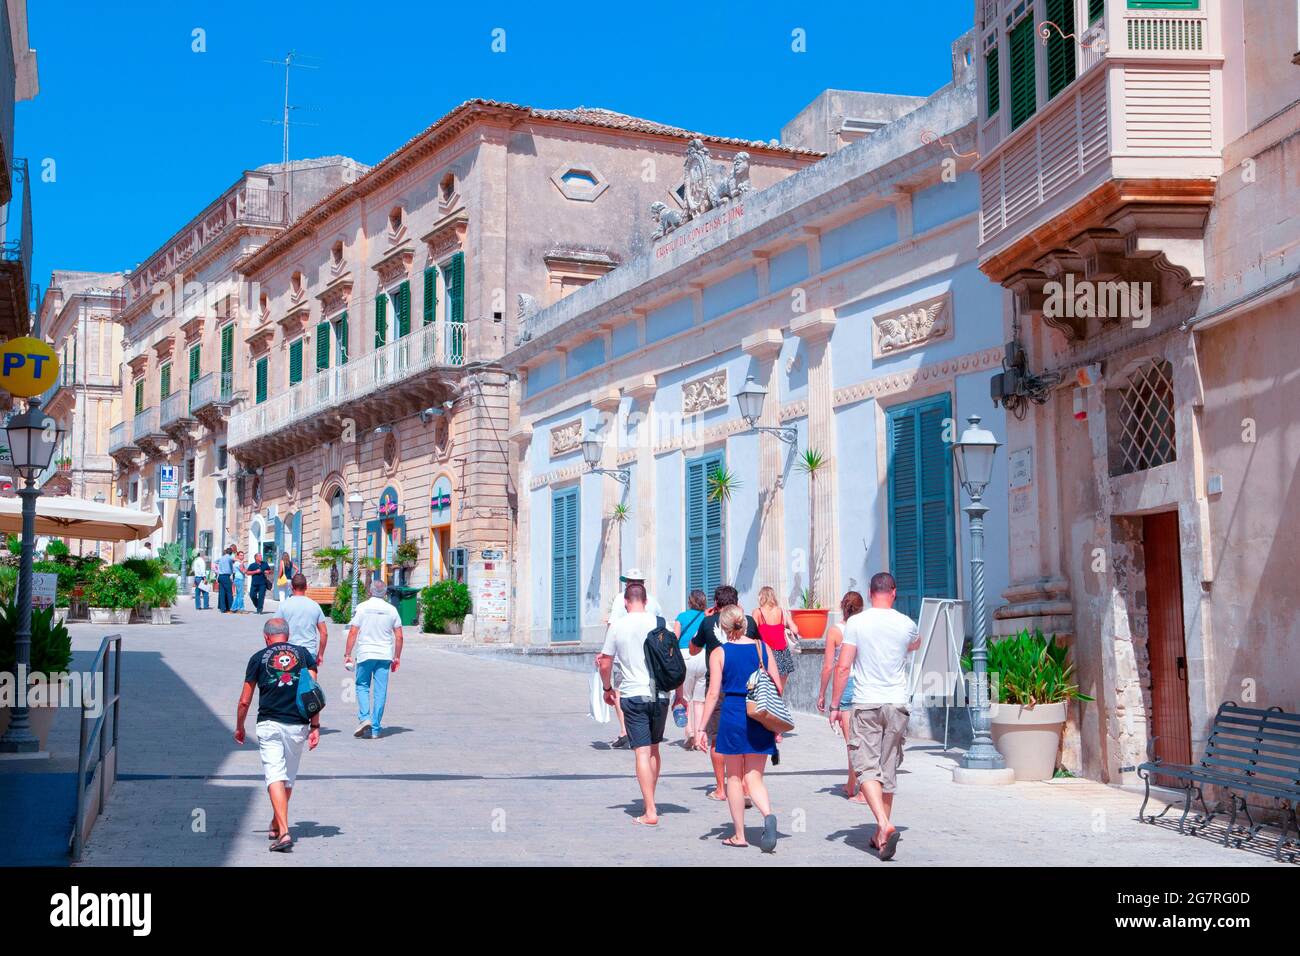 Circolo di Conversazione was built in 1850 as a social club but also appeared in a number of Inspector Montalbano TV series. Stock Photo